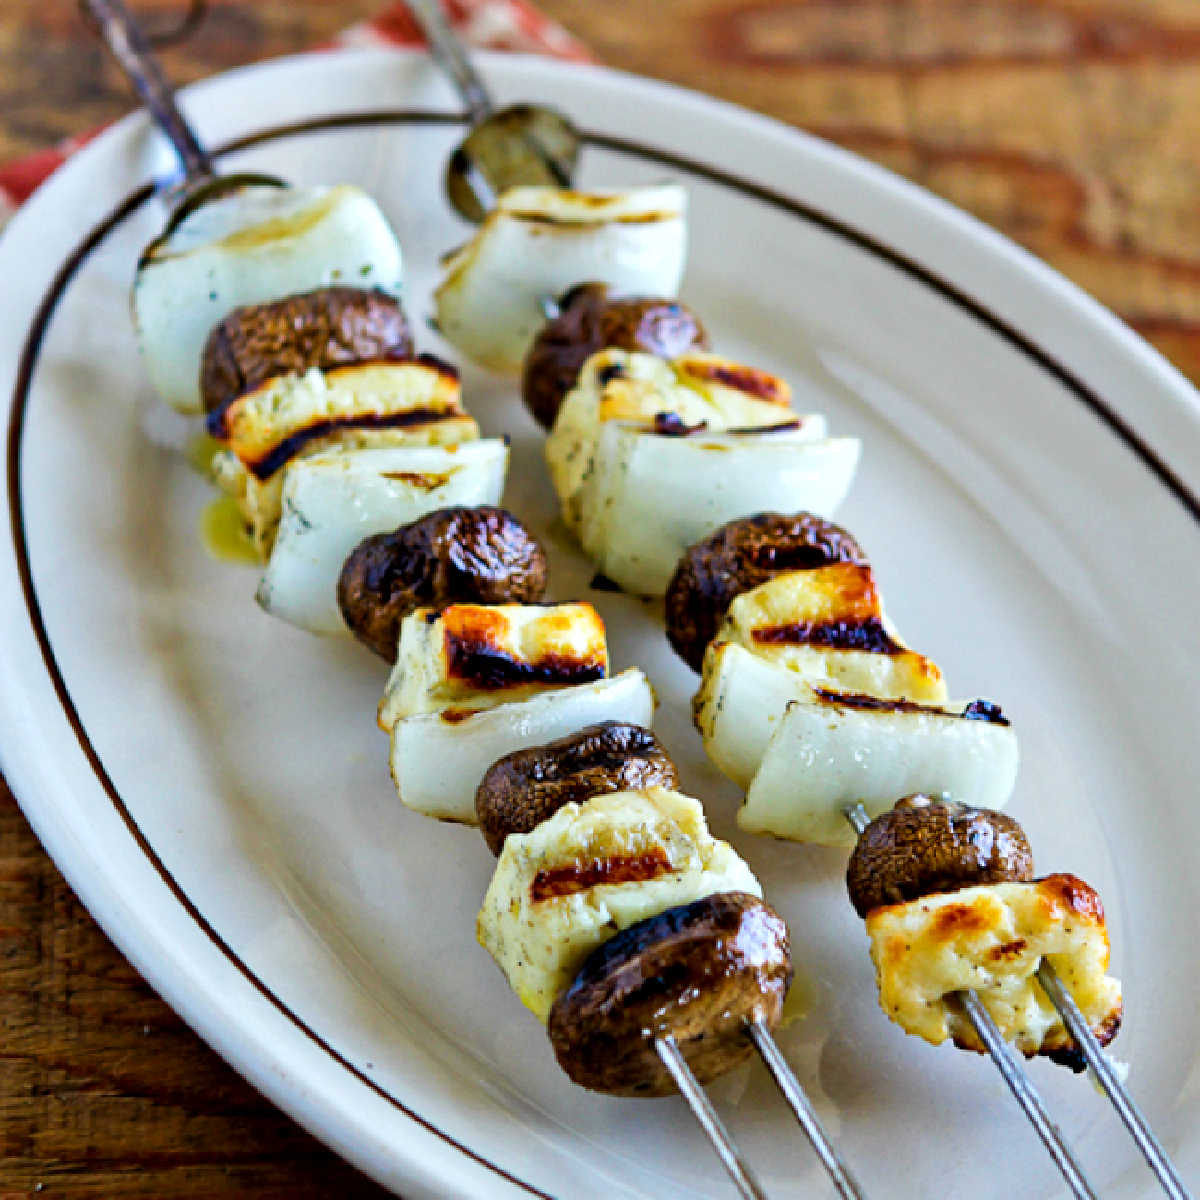 Square image of grilled halloumi cheese and mushrooms served on a platter